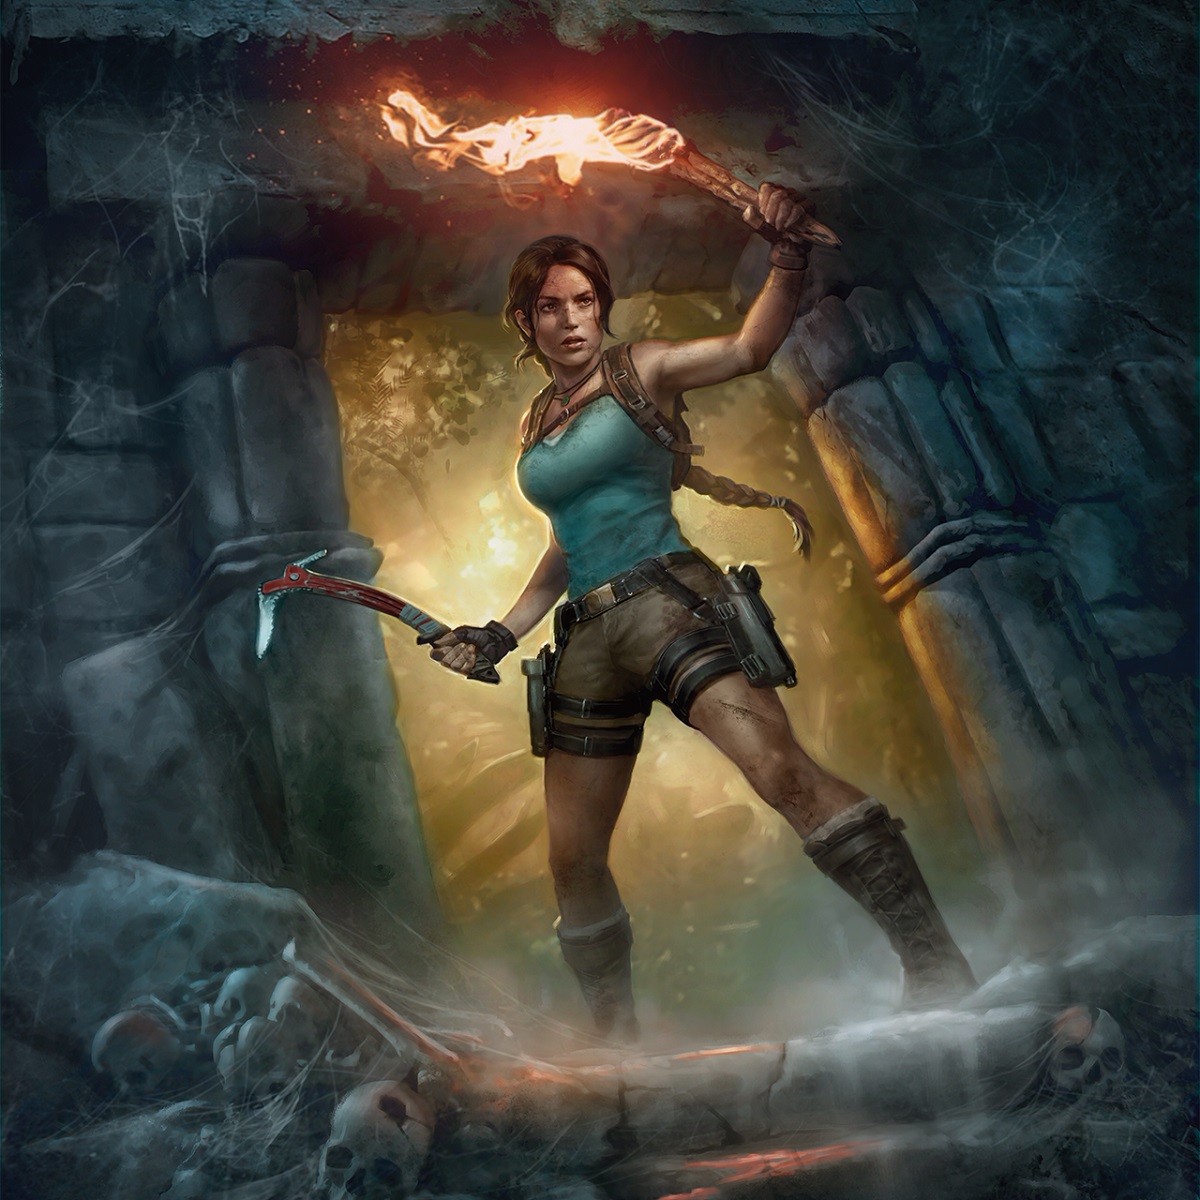 Lara Croft: Tomb Raider is getting a new game on top of her live